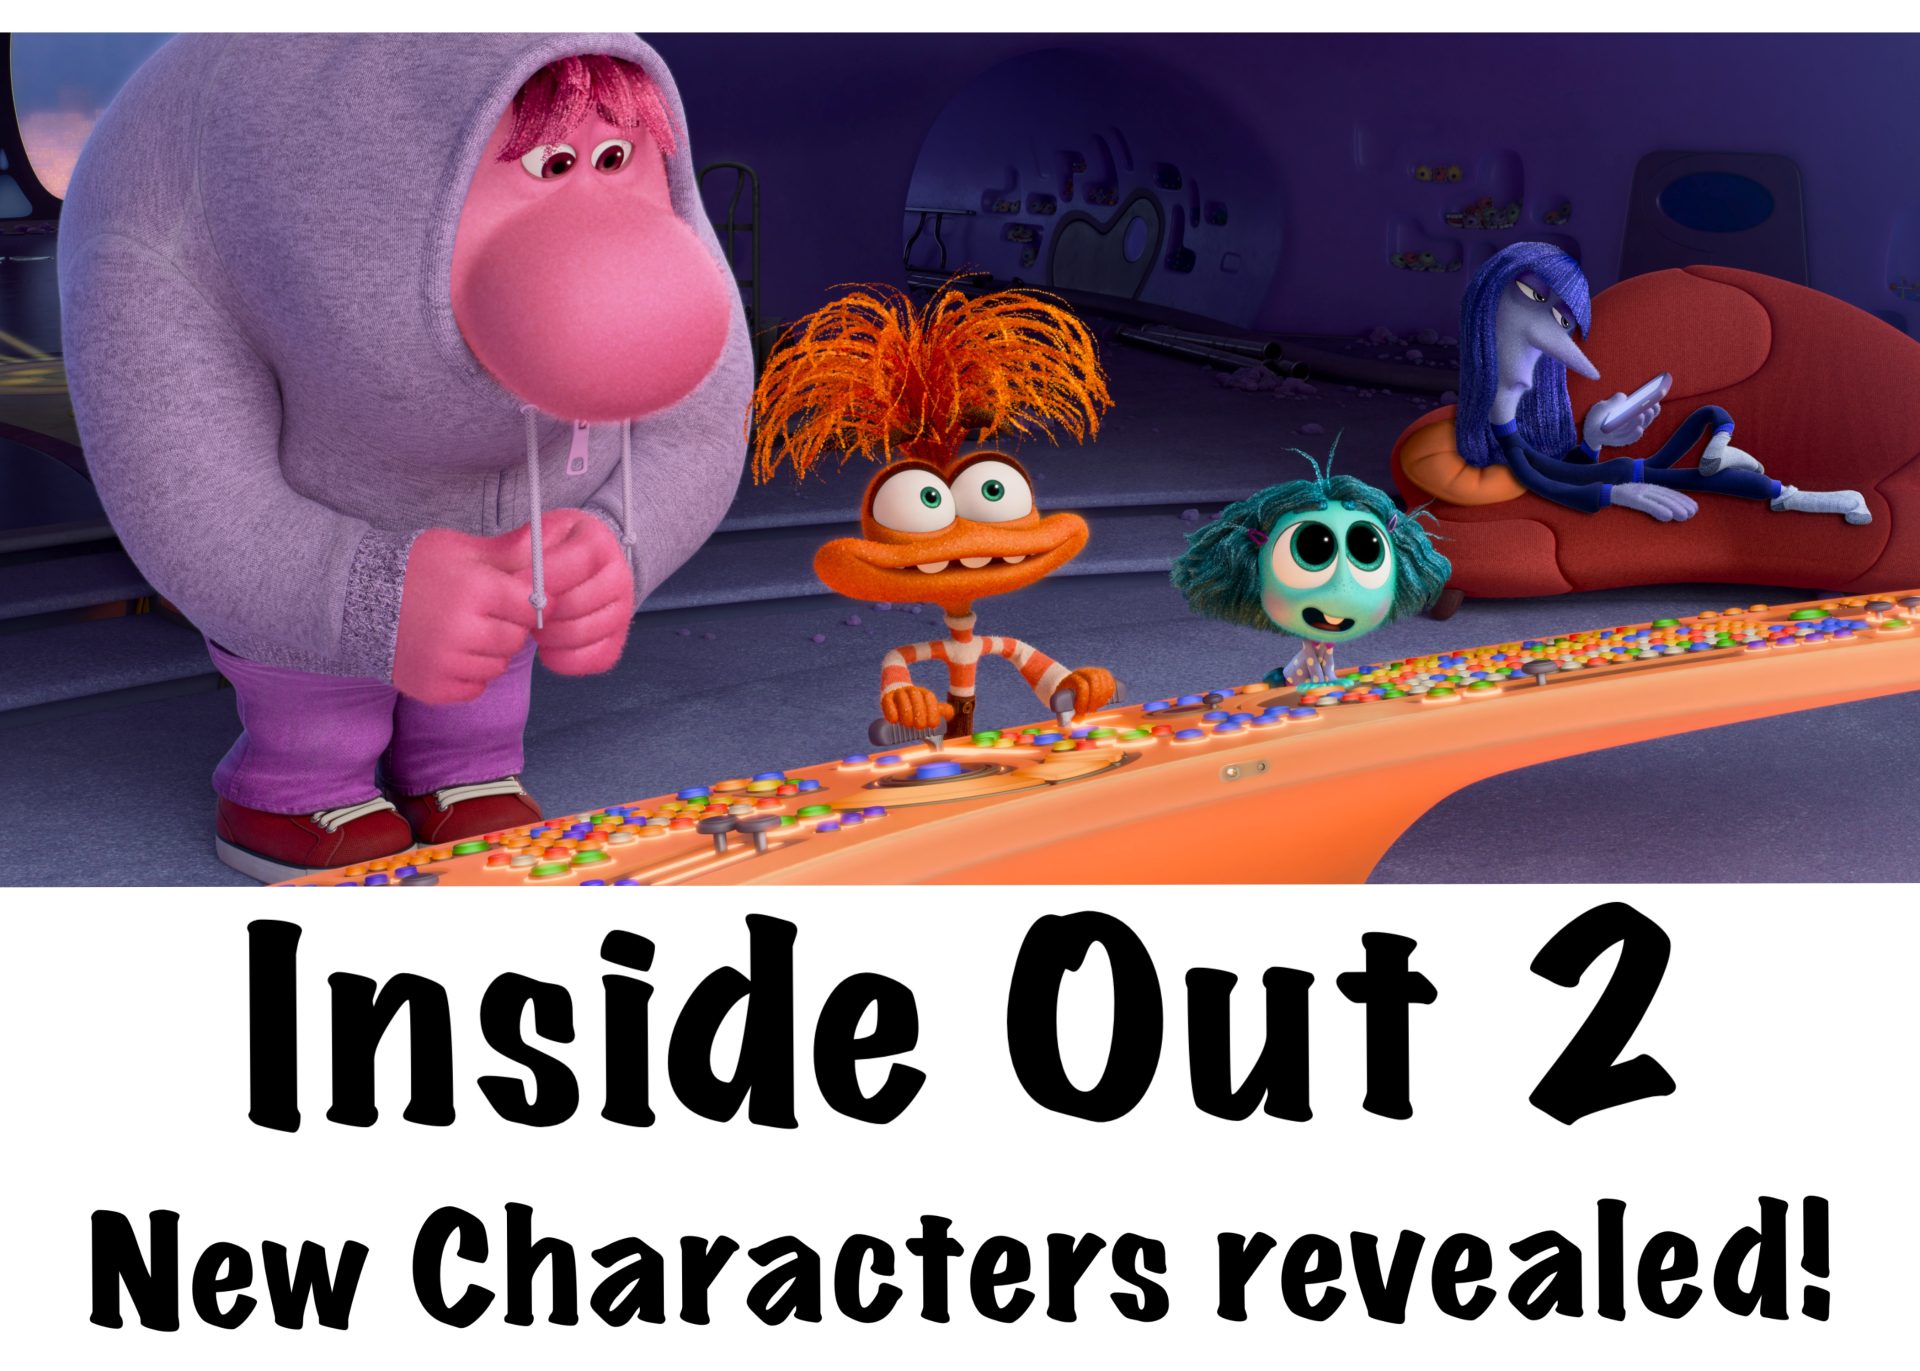 Disney and Pixar's 'Inside Out 2' Trailer Introduces a New Emotion: Anxiety